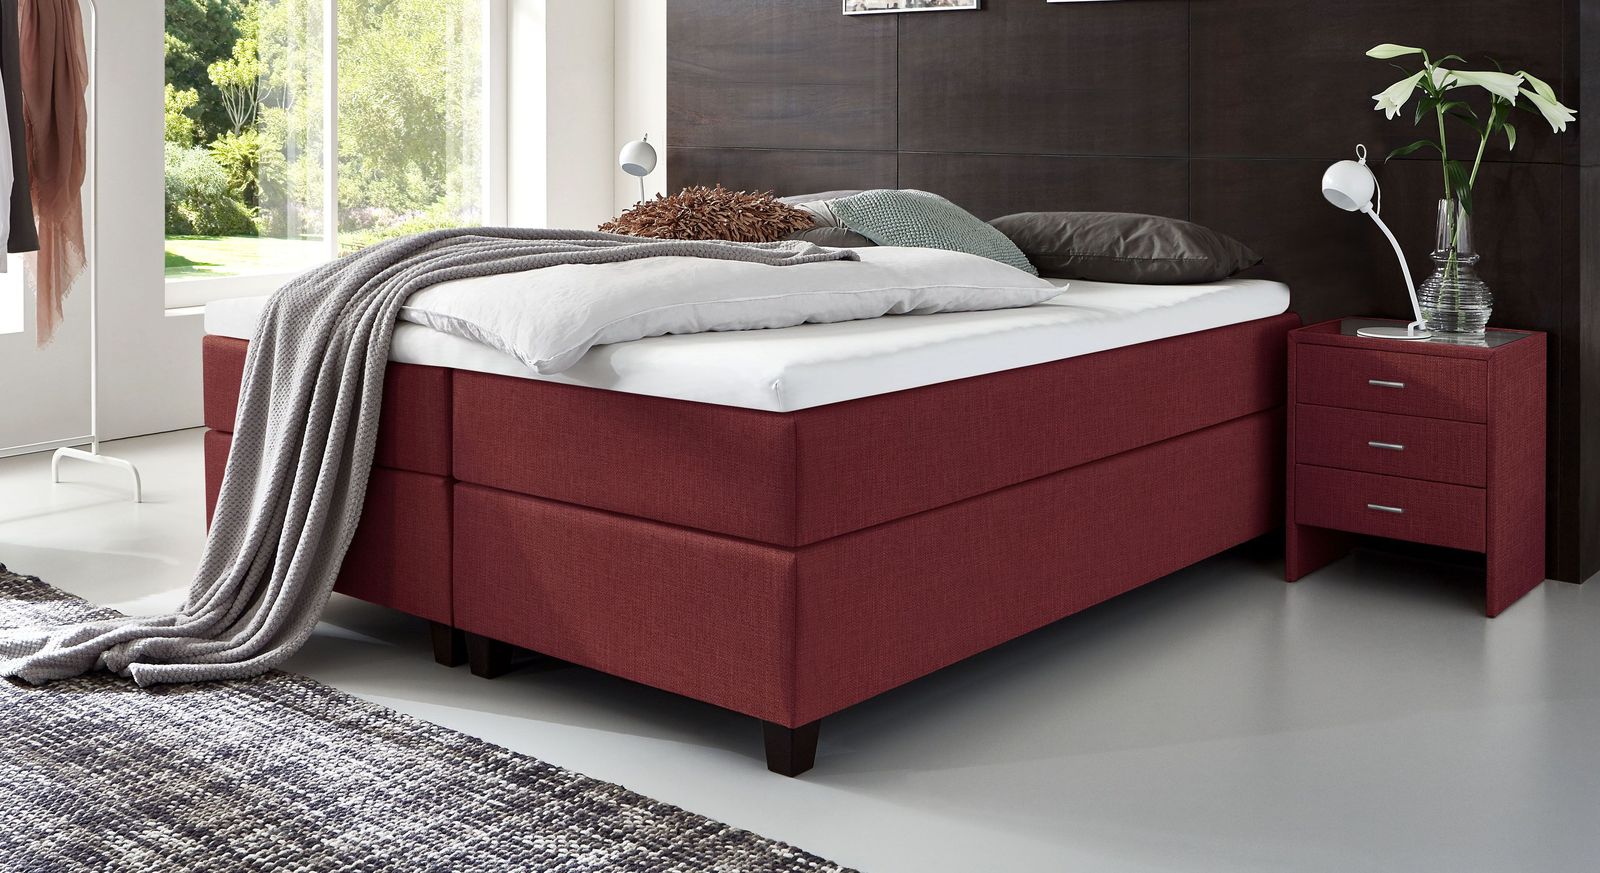 66 cm hohe Boxspringliege Luciano aus meliertem Webstoff in Rot